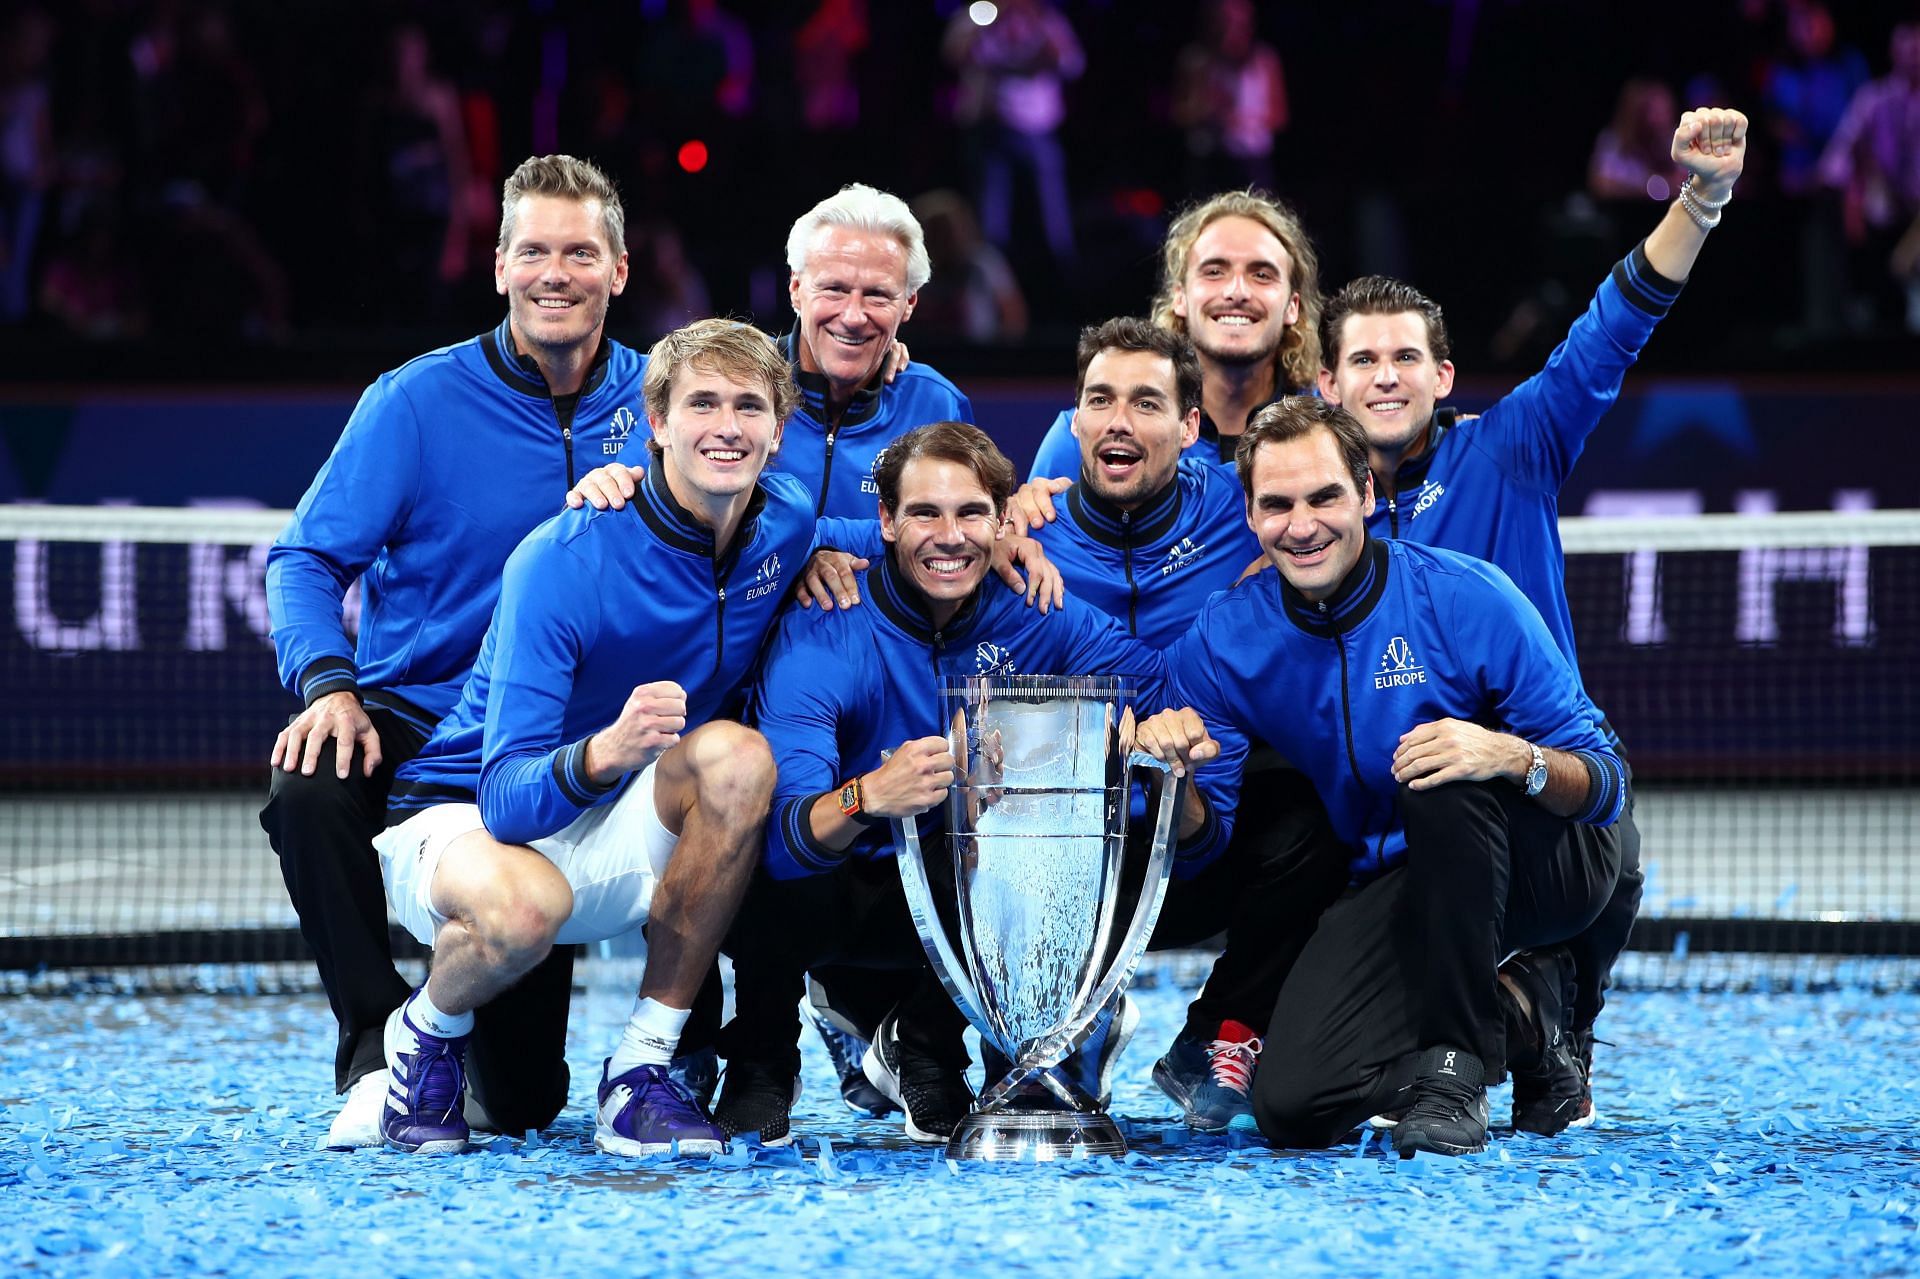 Laver Cup 2022 Players, format, venue, prize money and current champions